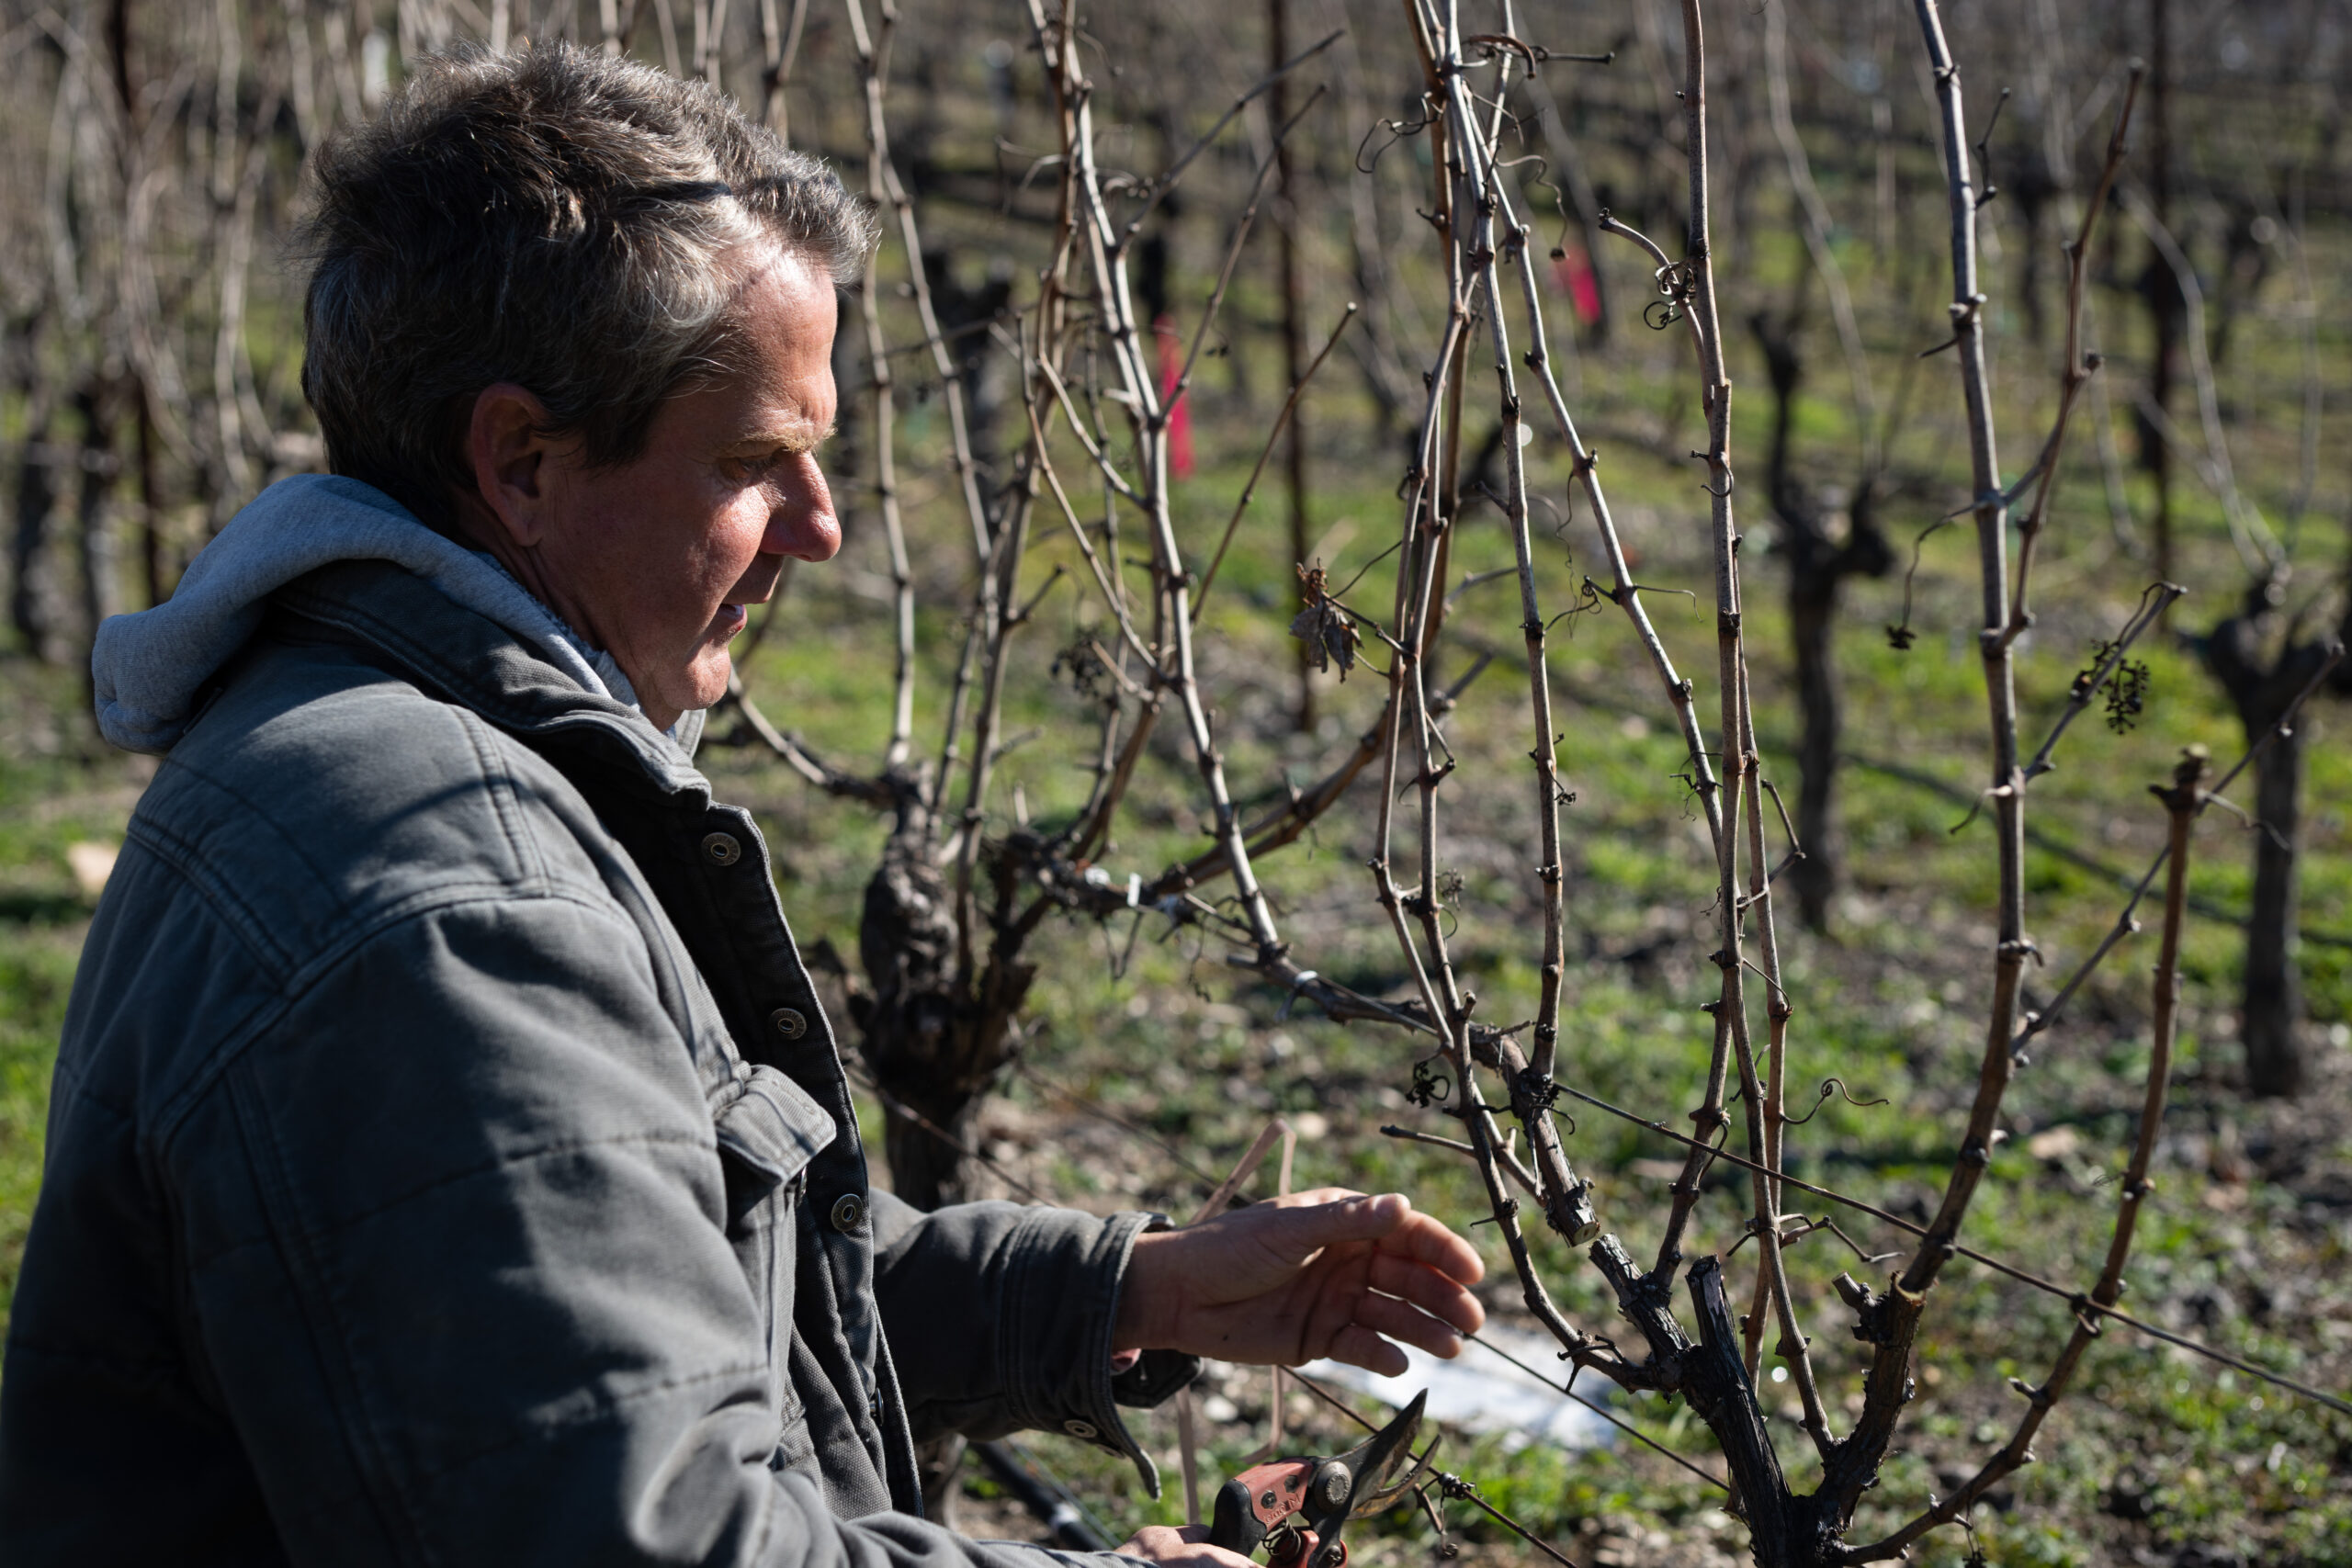 Image of the Vineyard Manager, Dave, pruning